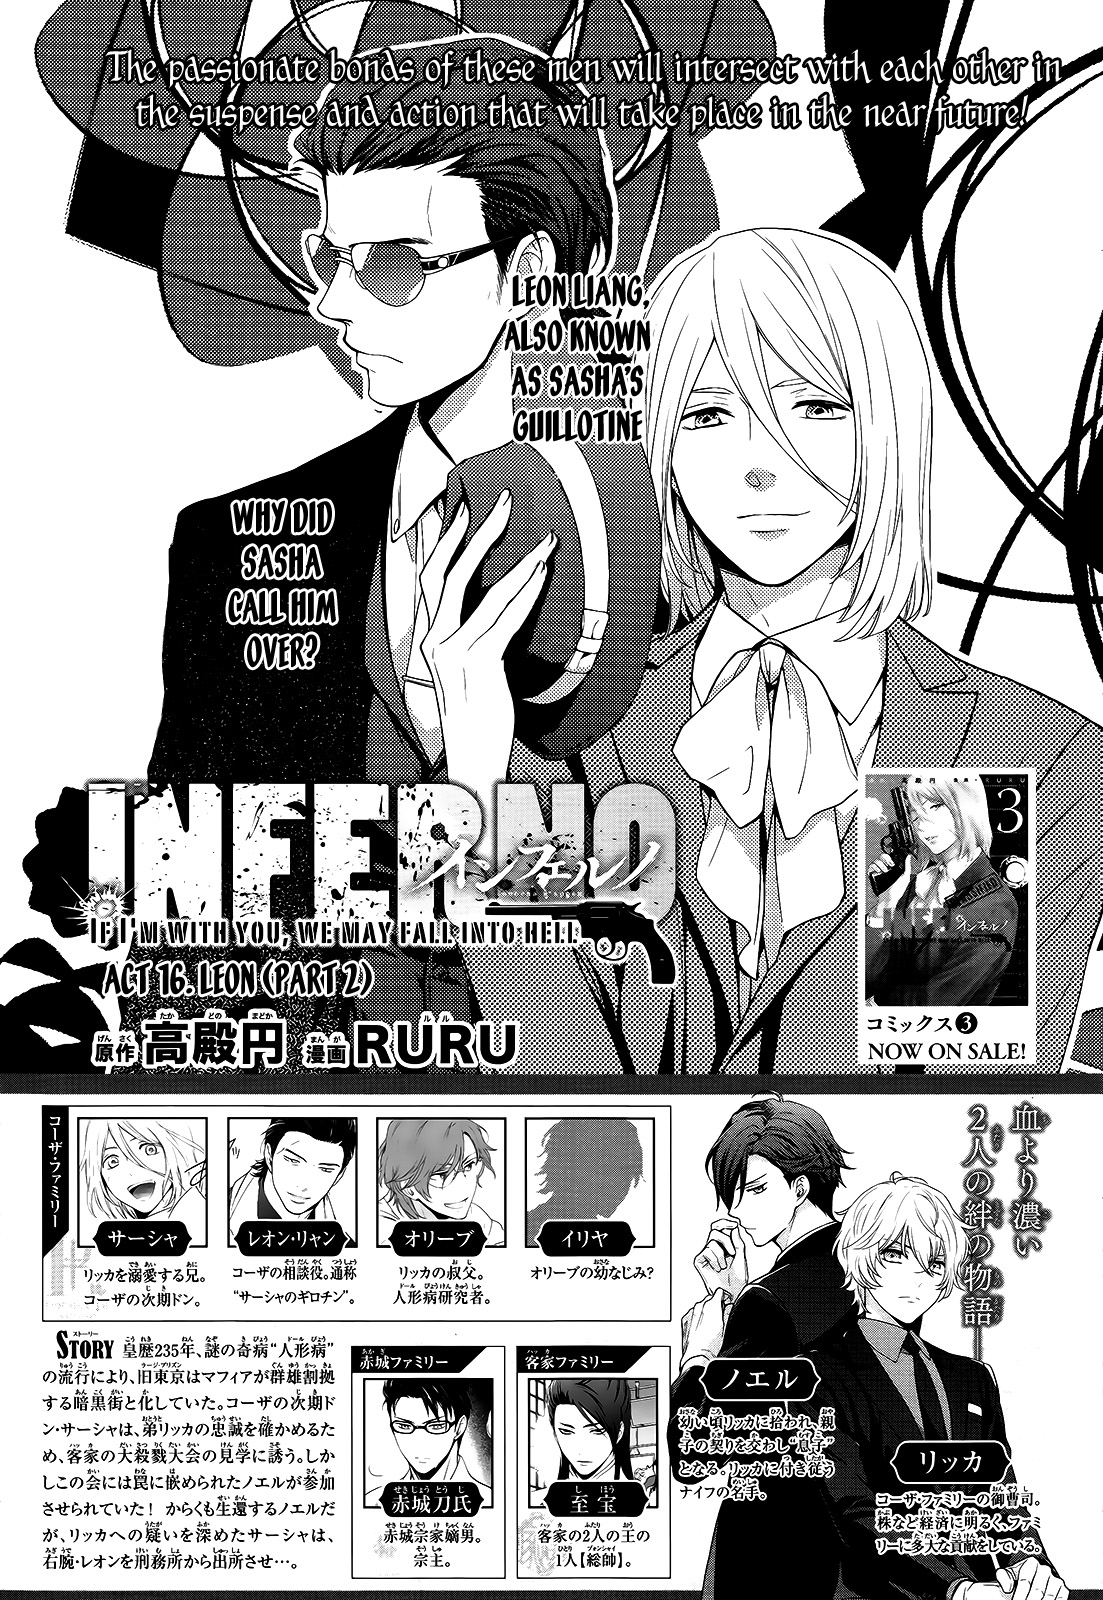 Inferno - If I'm with you, we may fall into hell Ch.16